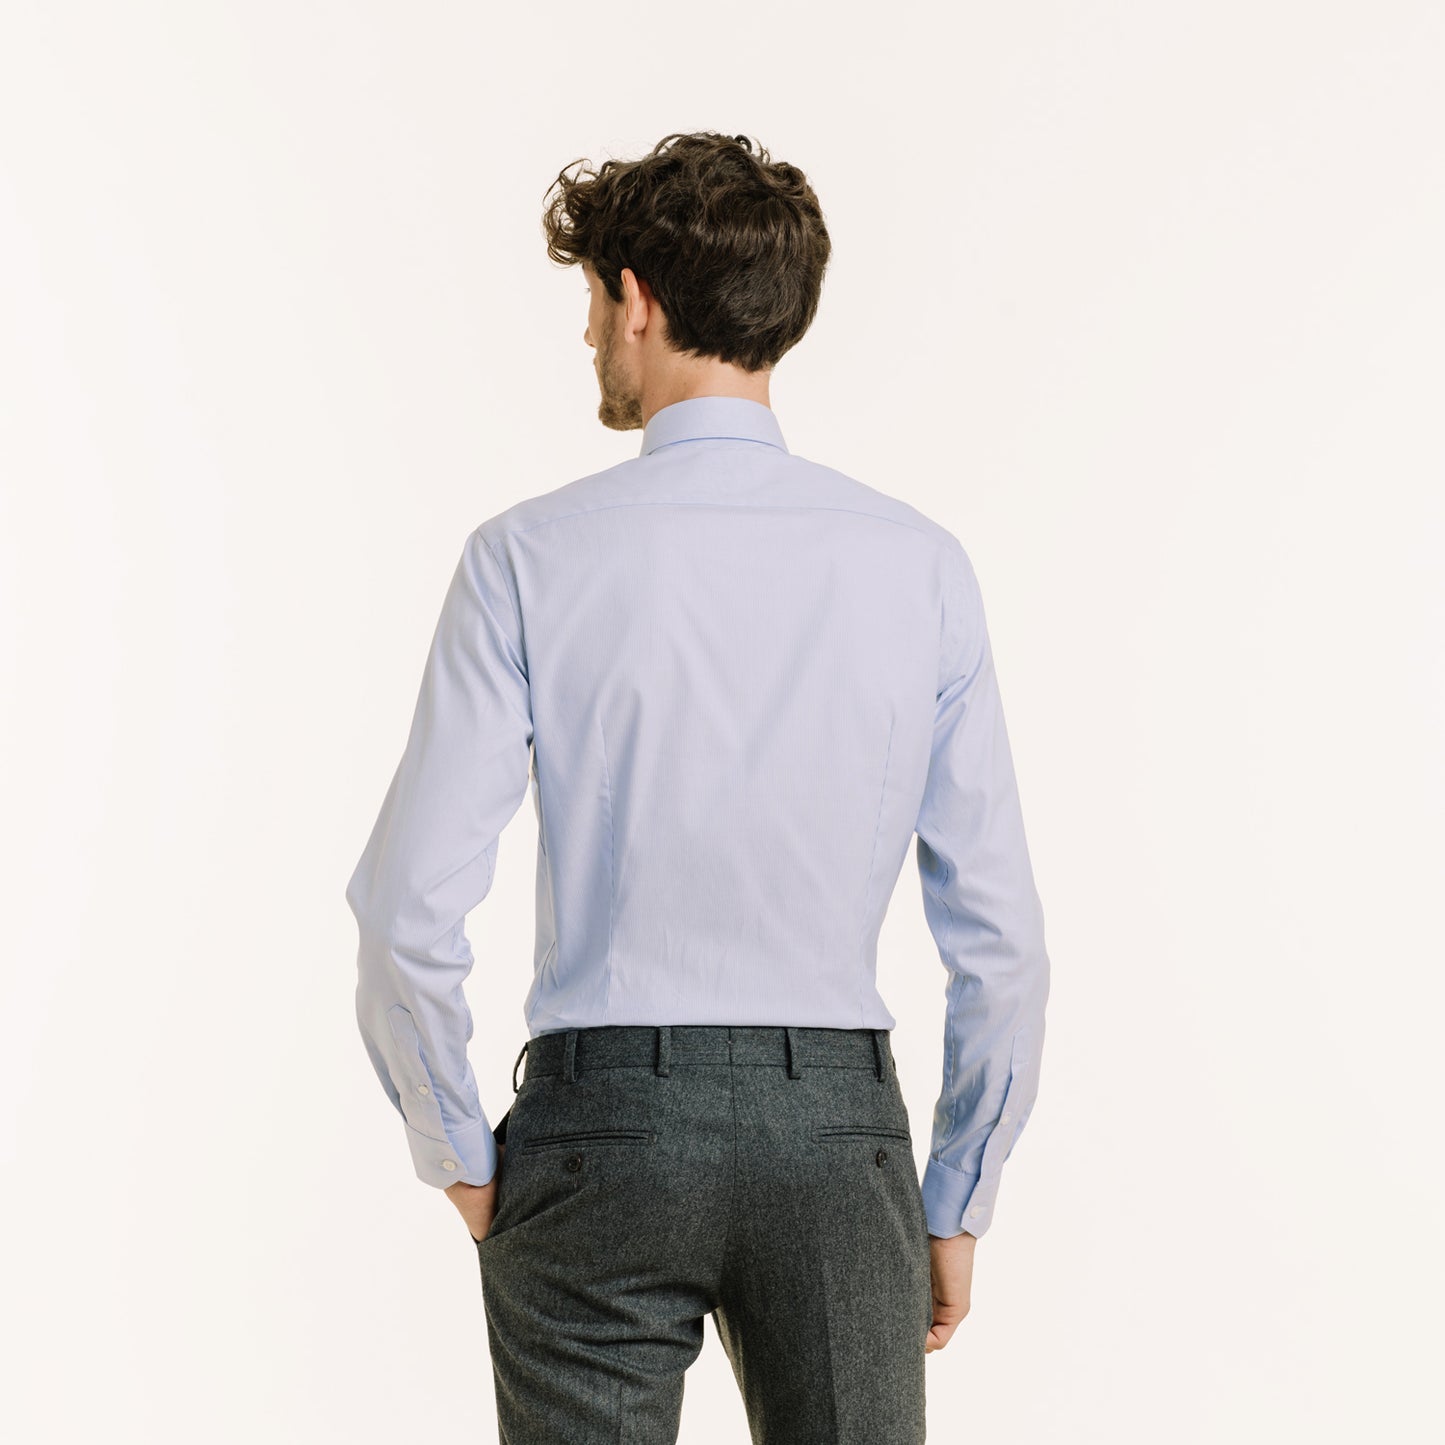 Fitted double-twisted Oxford shirt with fine blue stripes